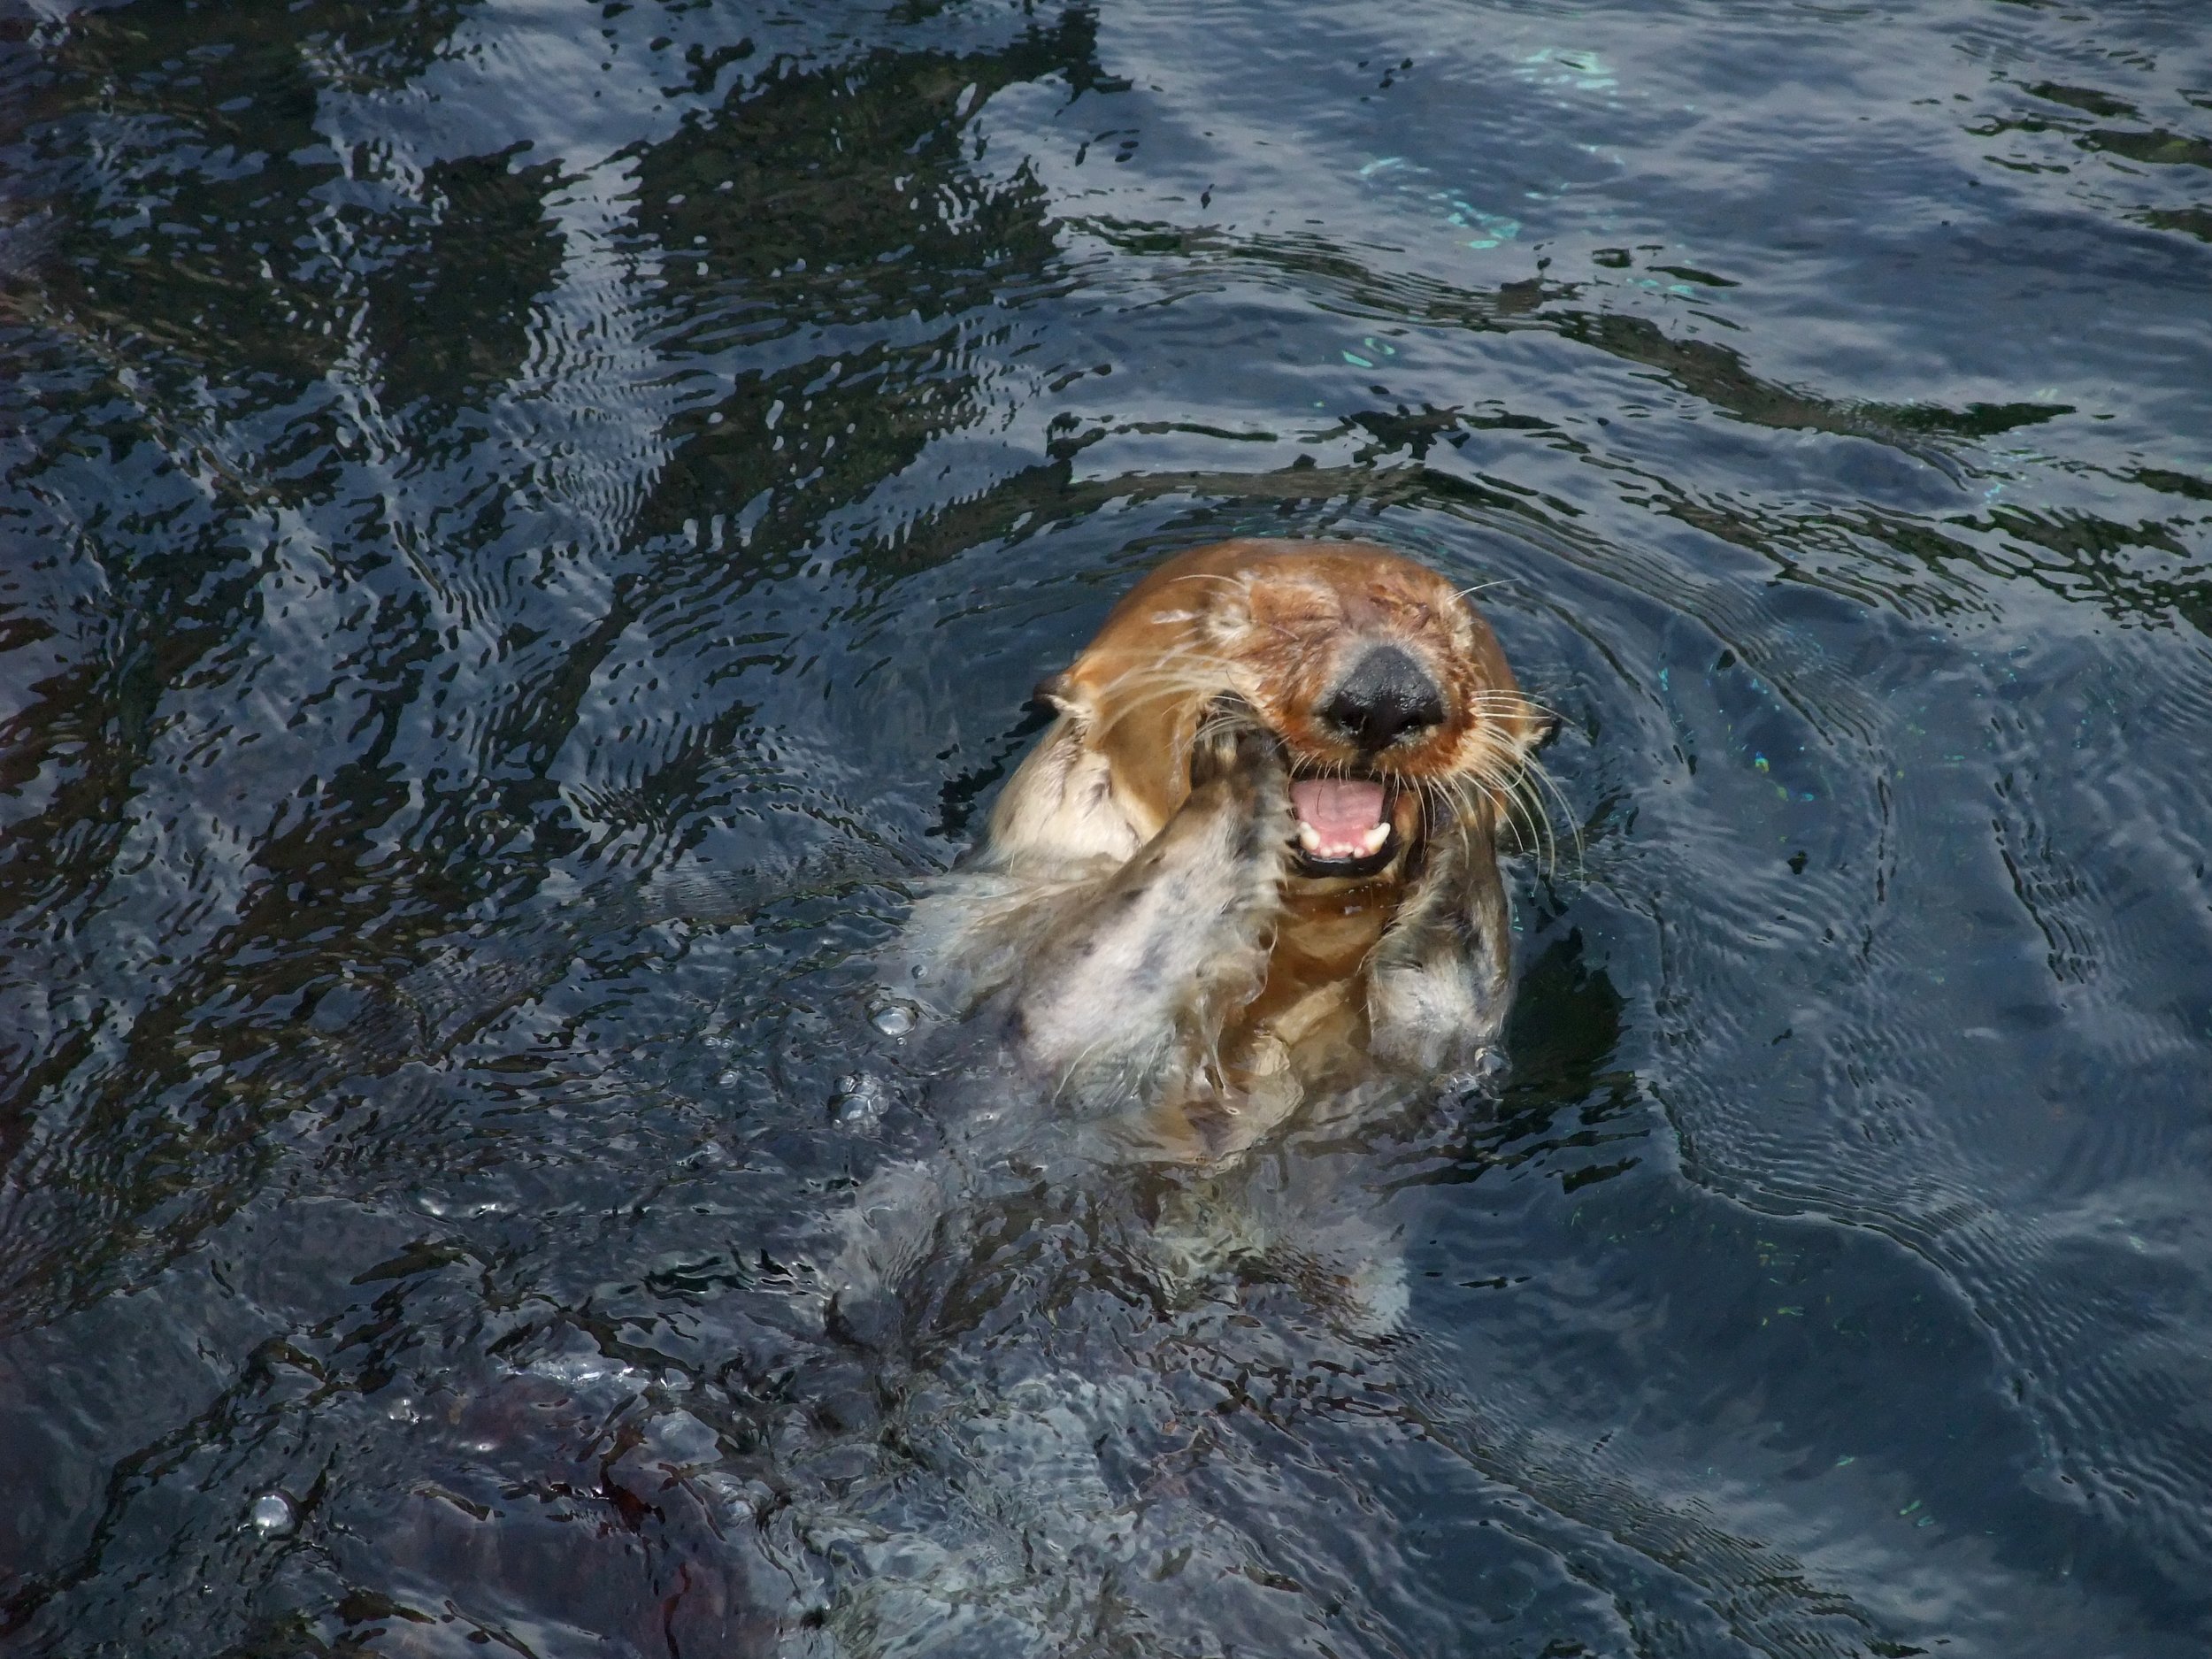 Otter Version of The Scream (with Apologies to Edvard Munch)